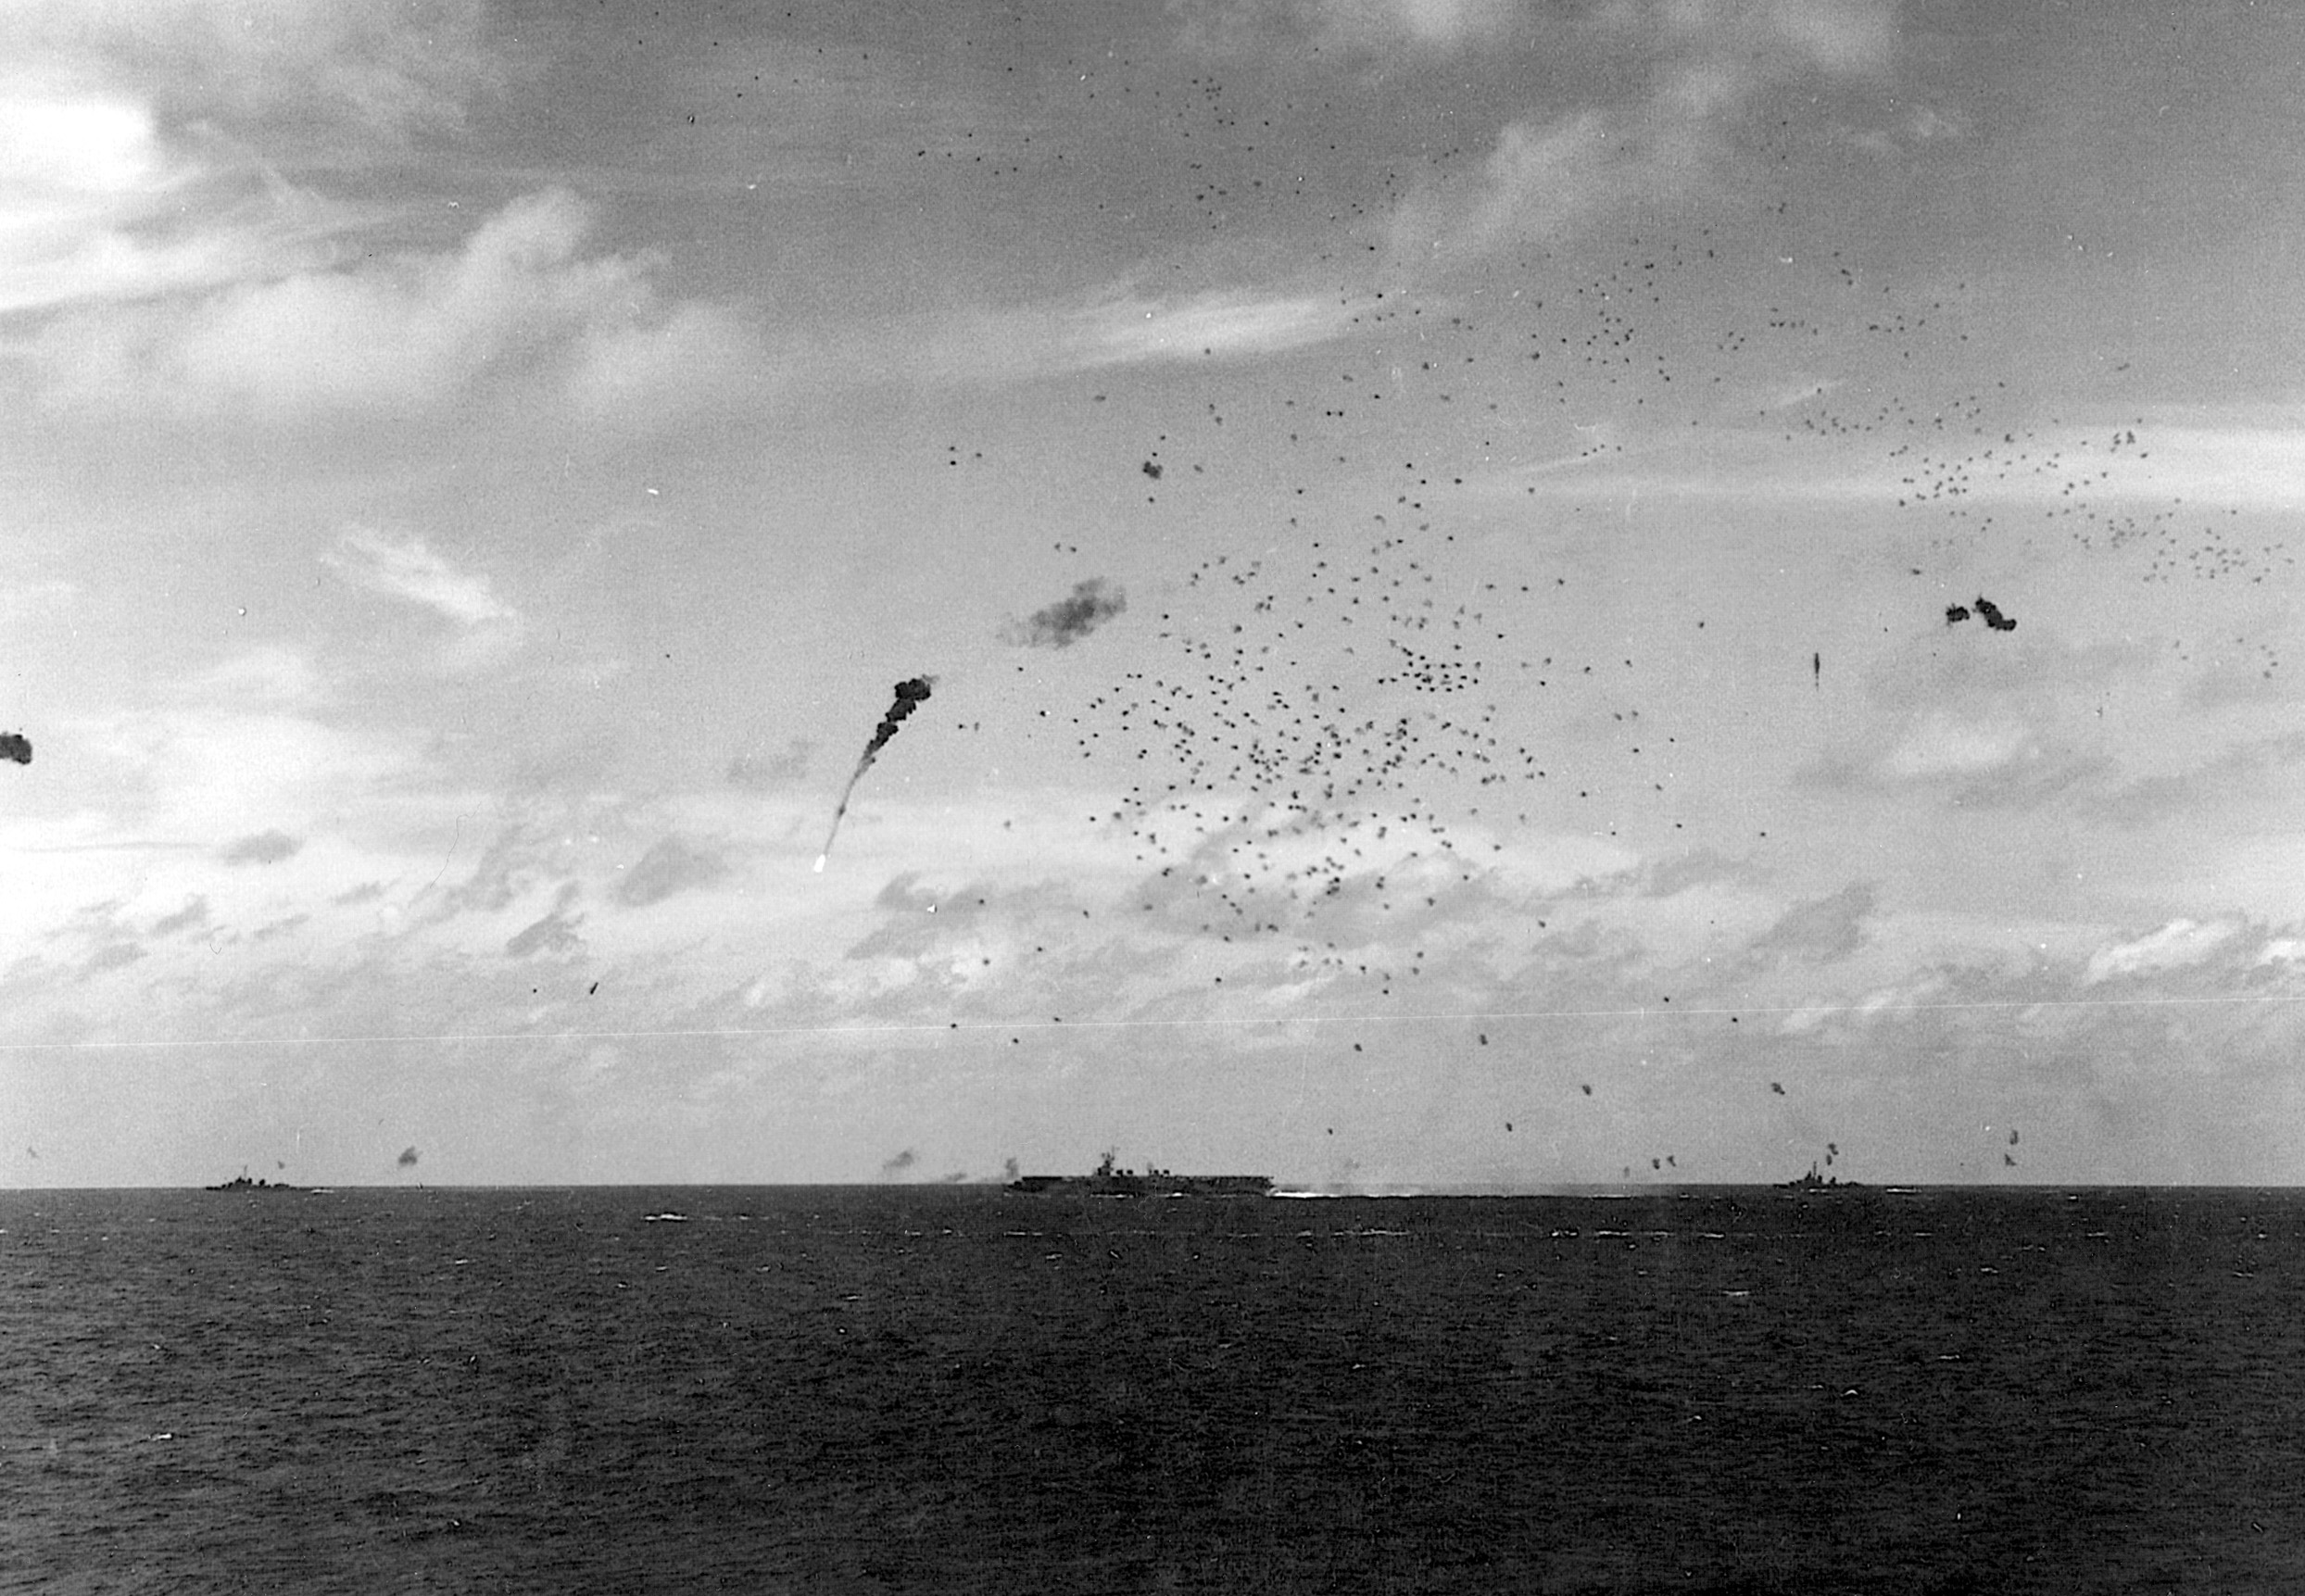 A Japanese plane bursts into flames as accurate antiaircraft fire from an American escort carrier sends it spiraling into the sea. 